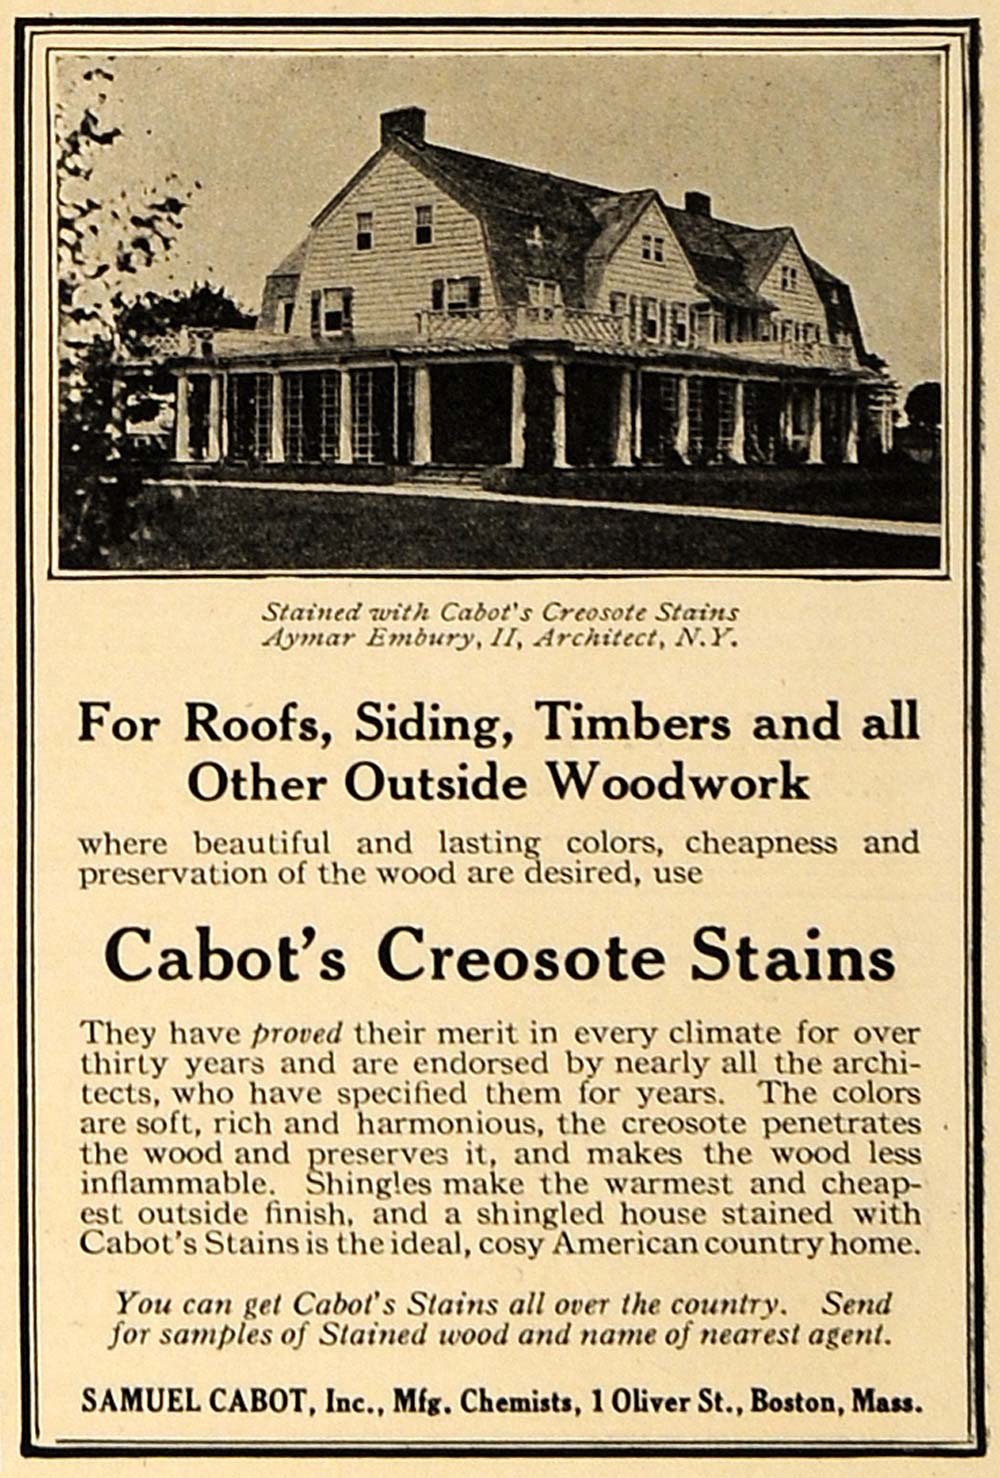 1916 Ad Samuel Cabot's Creosote Stains Coating Home - ORIGINAL ADVERTISING GM1